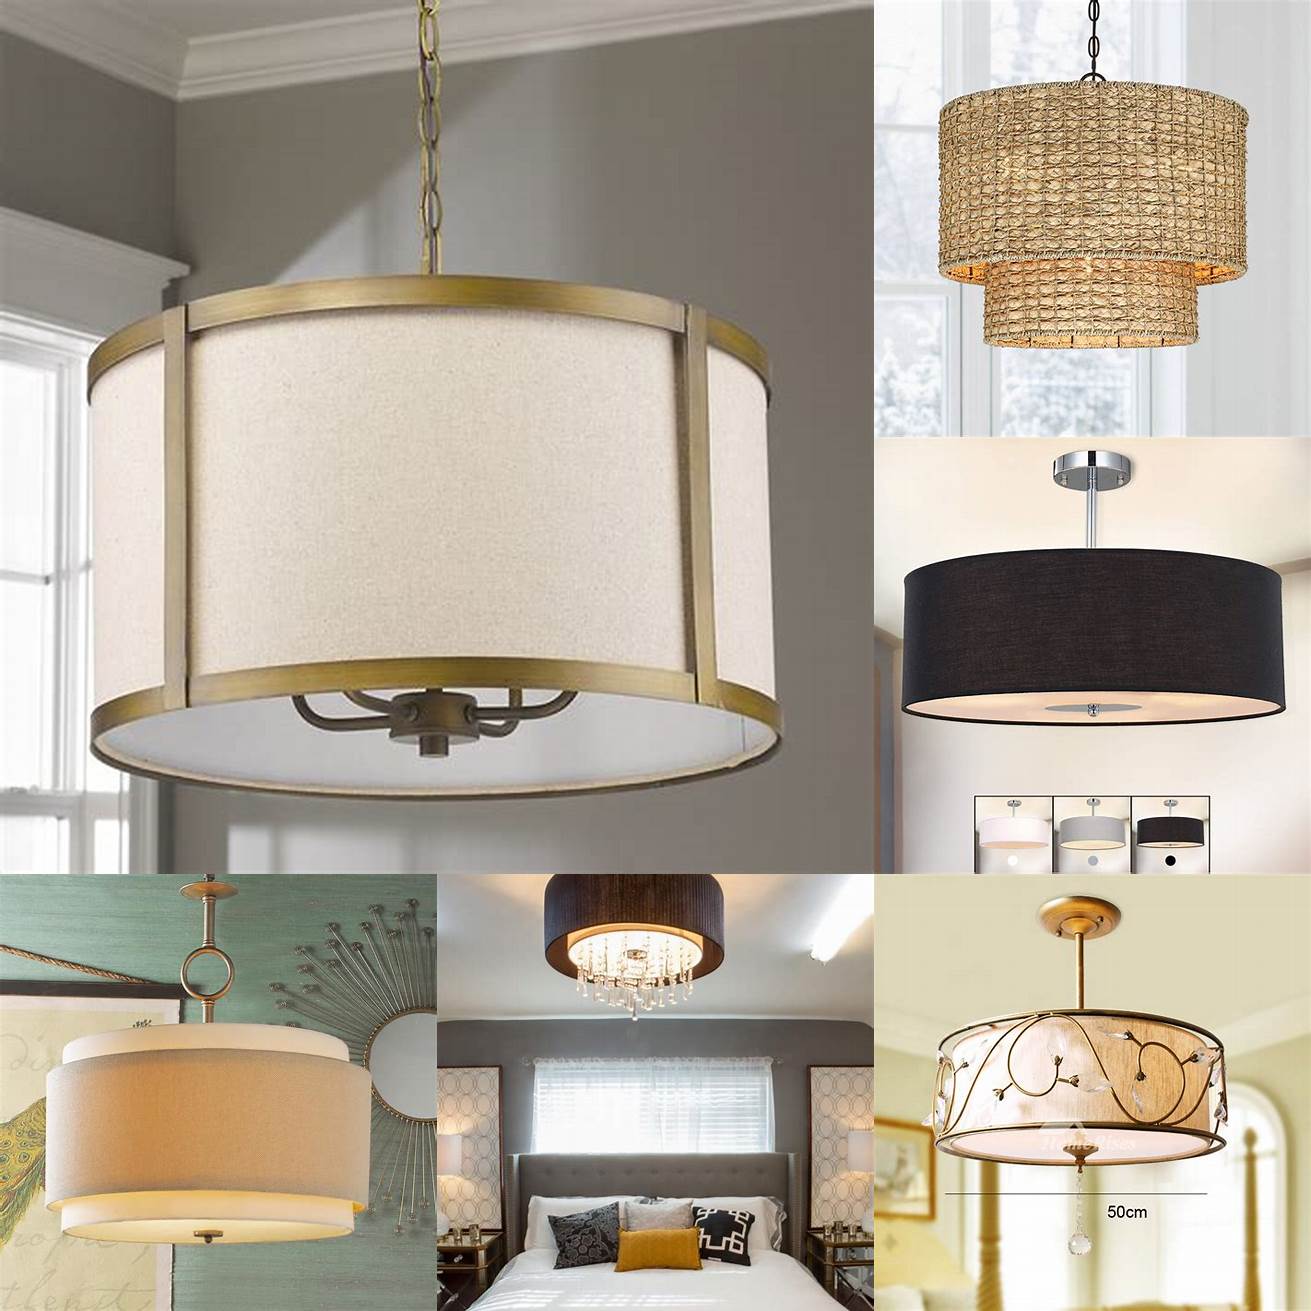 Use a drum pendant light in a bedroom for a cozy and intimate feel